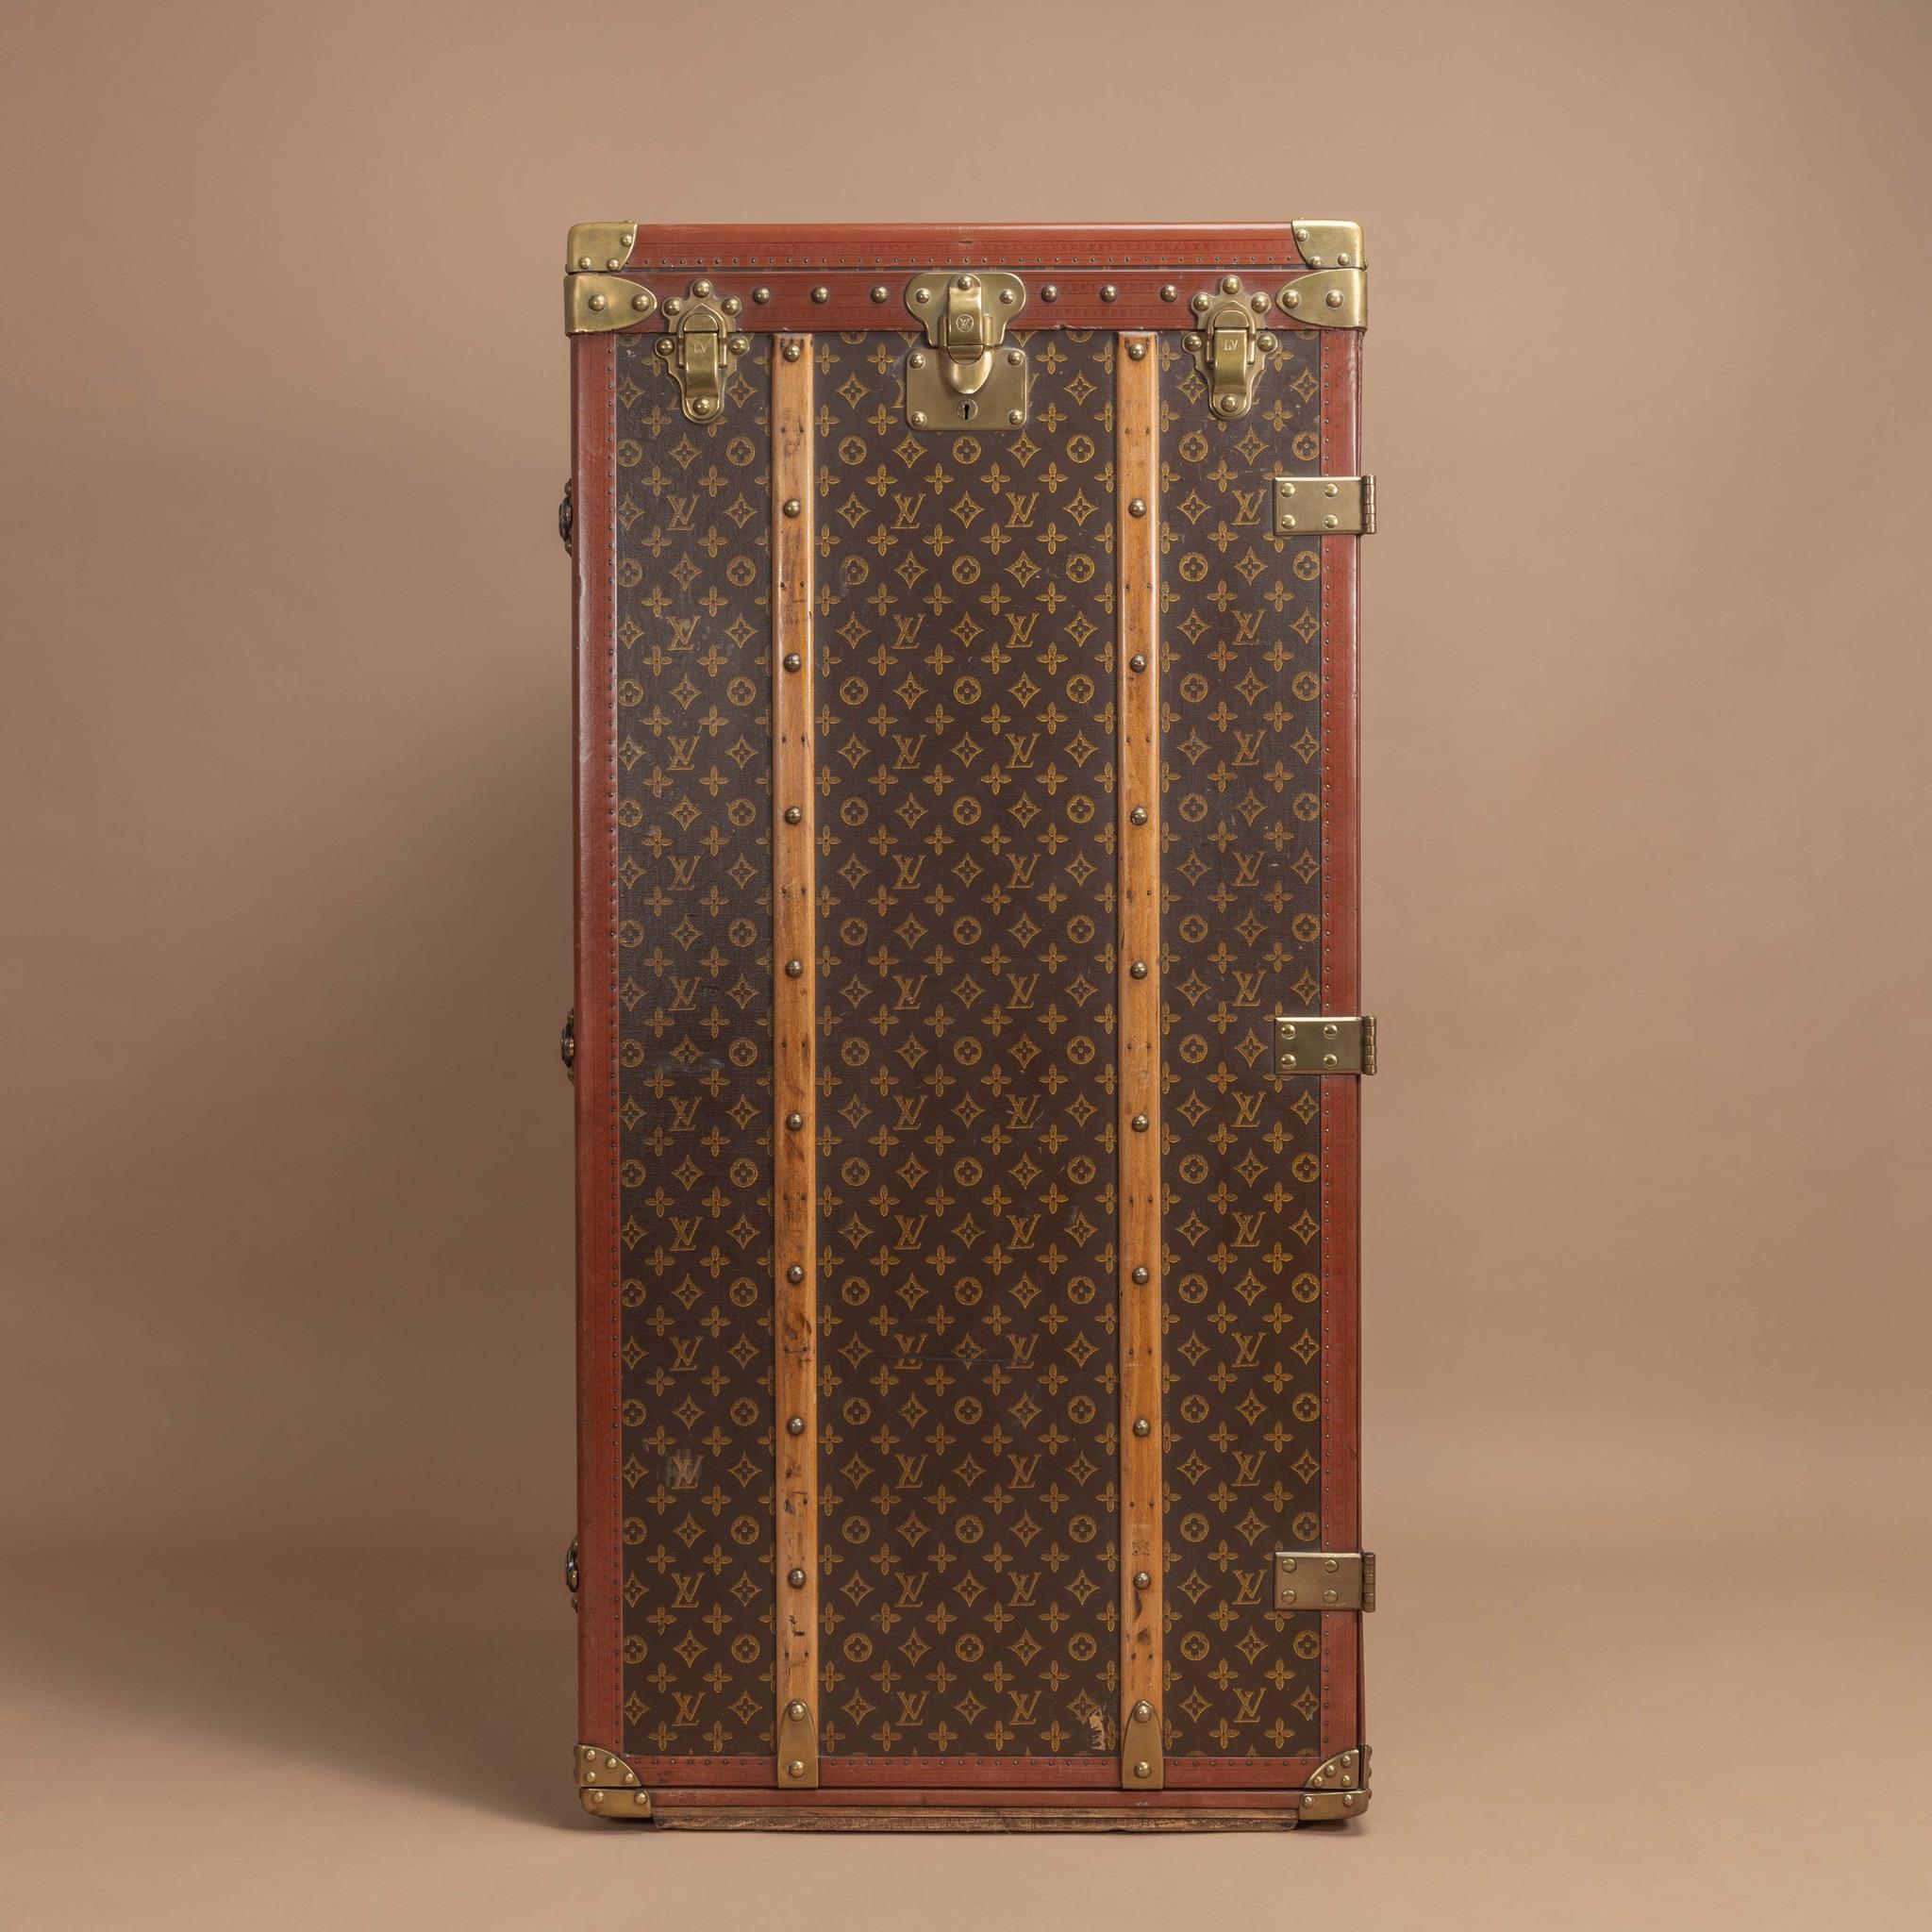 A rare, very large scale brass bound Louis Vuitton wardrobe trunk in LV Monogram with lozine trim and original interior fittings providing hanging space; circa 1955. Has the original owner's name and details. Marian Carter-Achilles was wife to